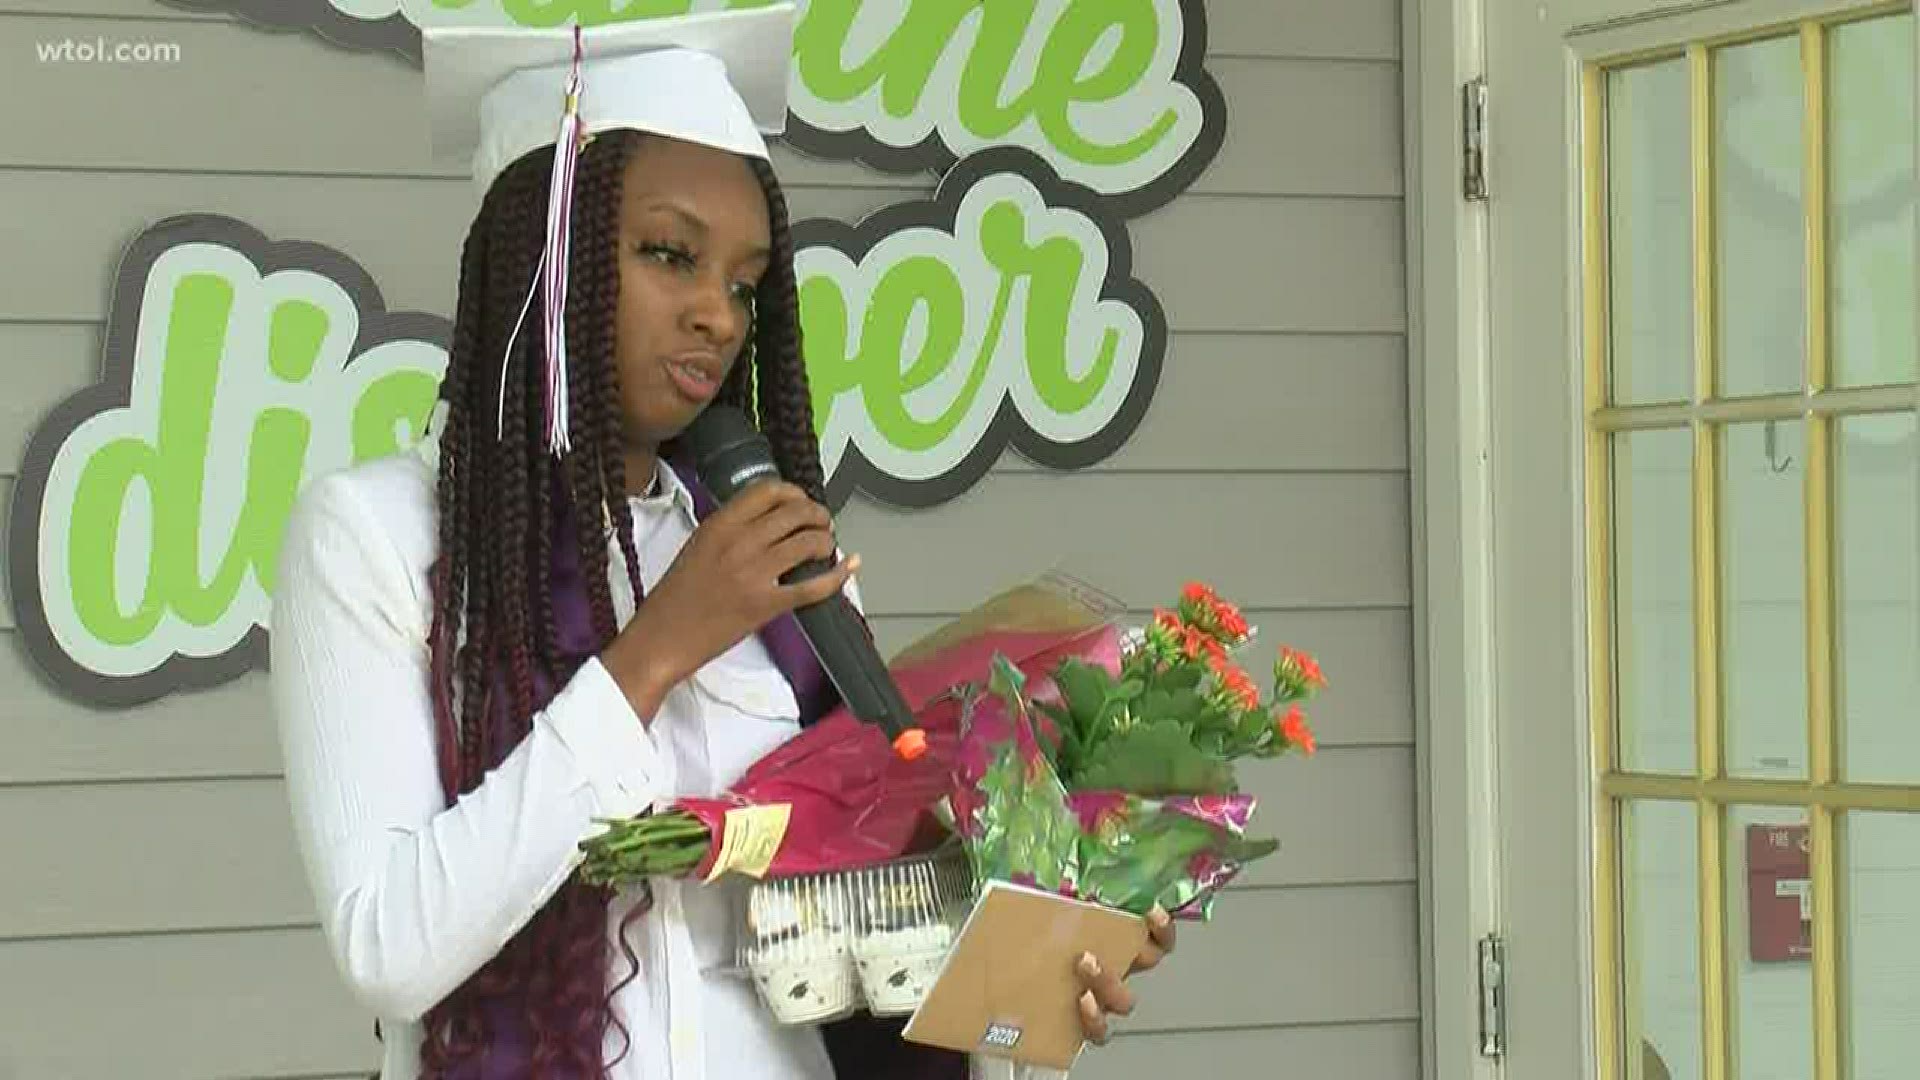 Pregnant at 14, Ma'Nysha Burton wasn't sure if she'd graduate high school. Now she has a college acceptance letter.